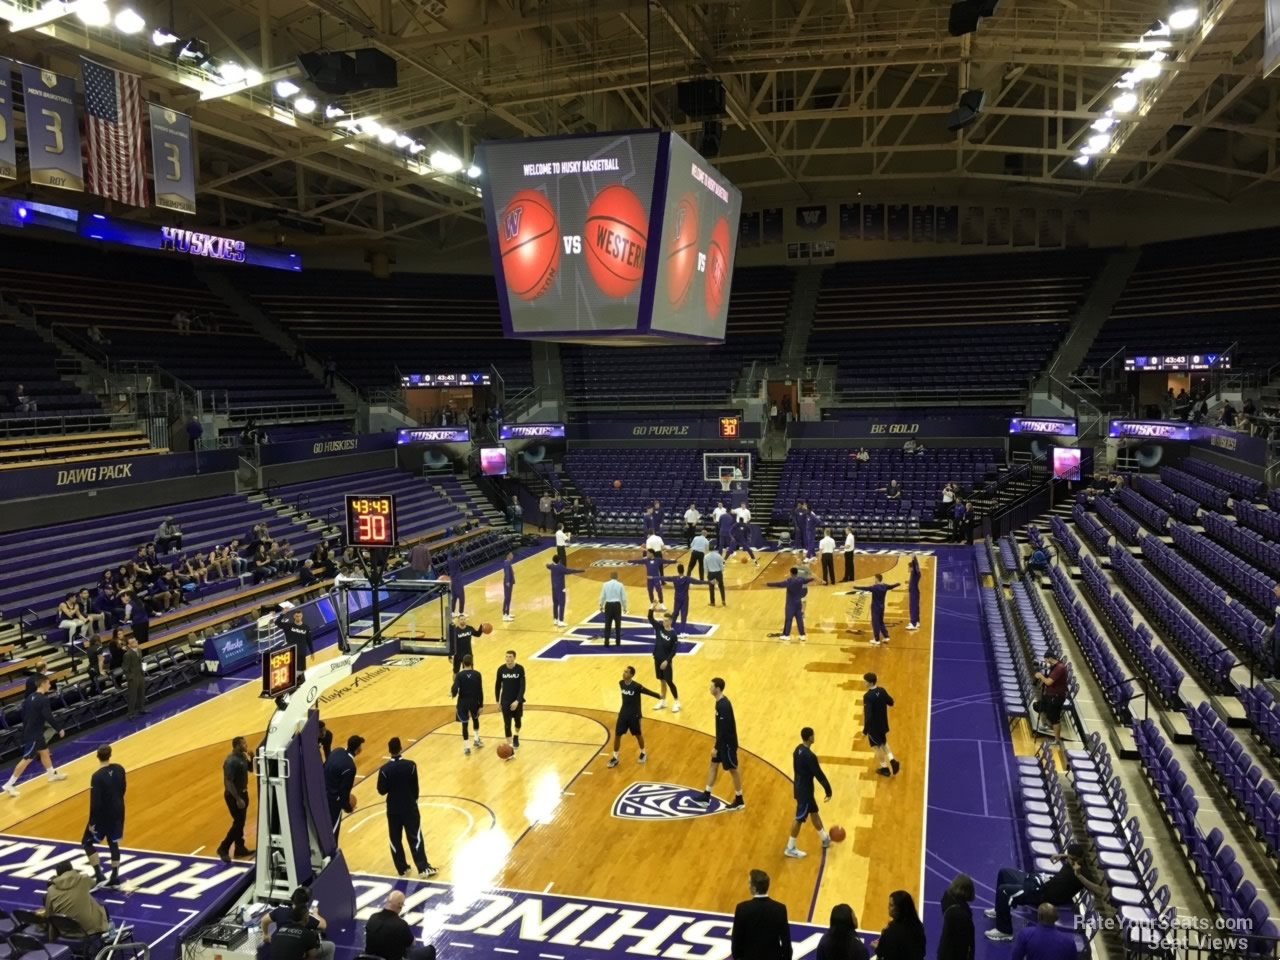 section 11, row 10 seat view  - alaska airlines arena